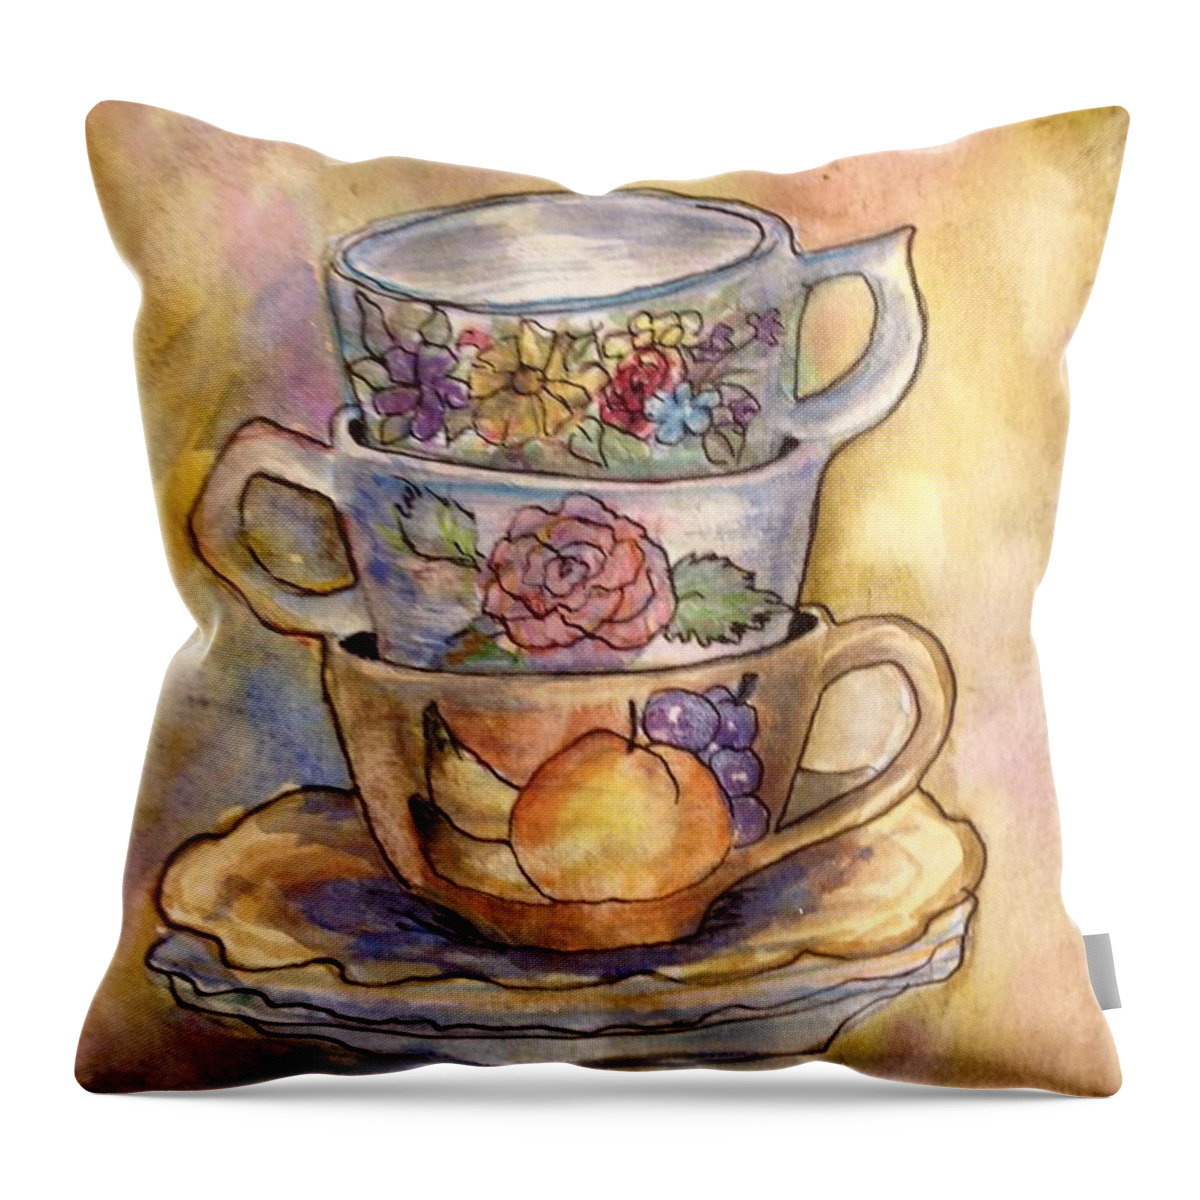 China Throw Pillow featuring the painting Mom's China by Cheryl Wallace